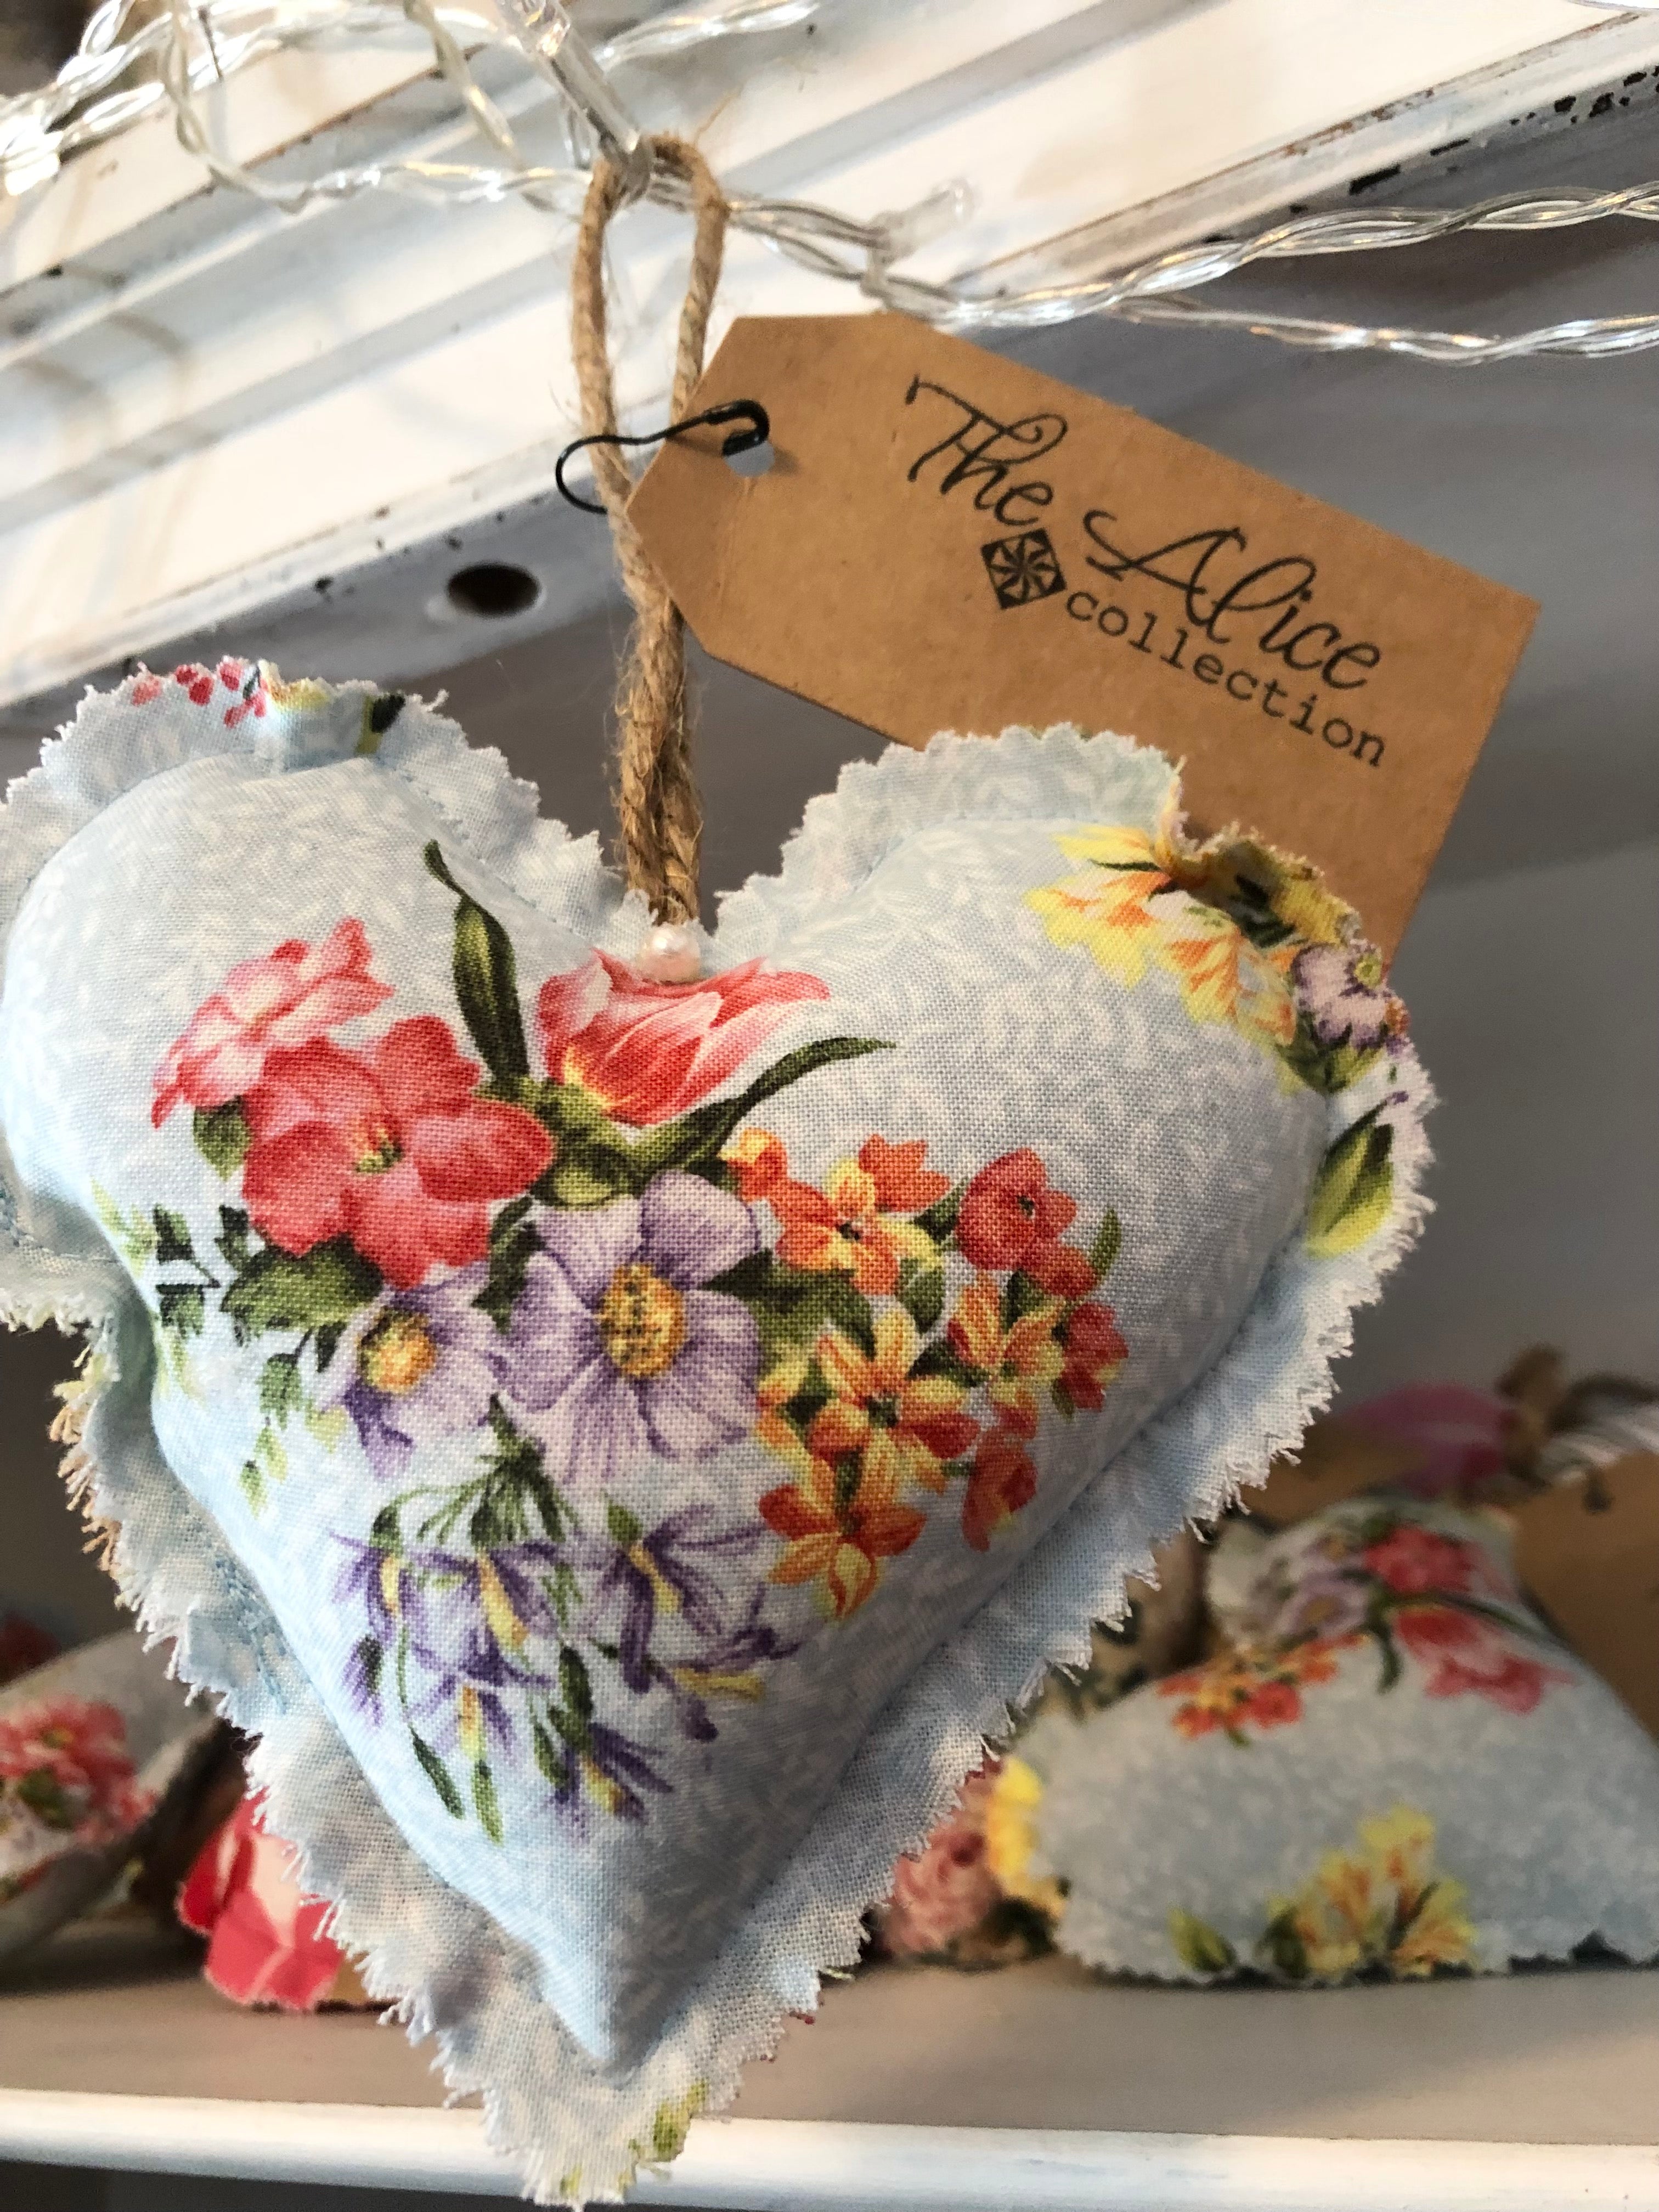 Scented Heart Sachet by The Alice Collection